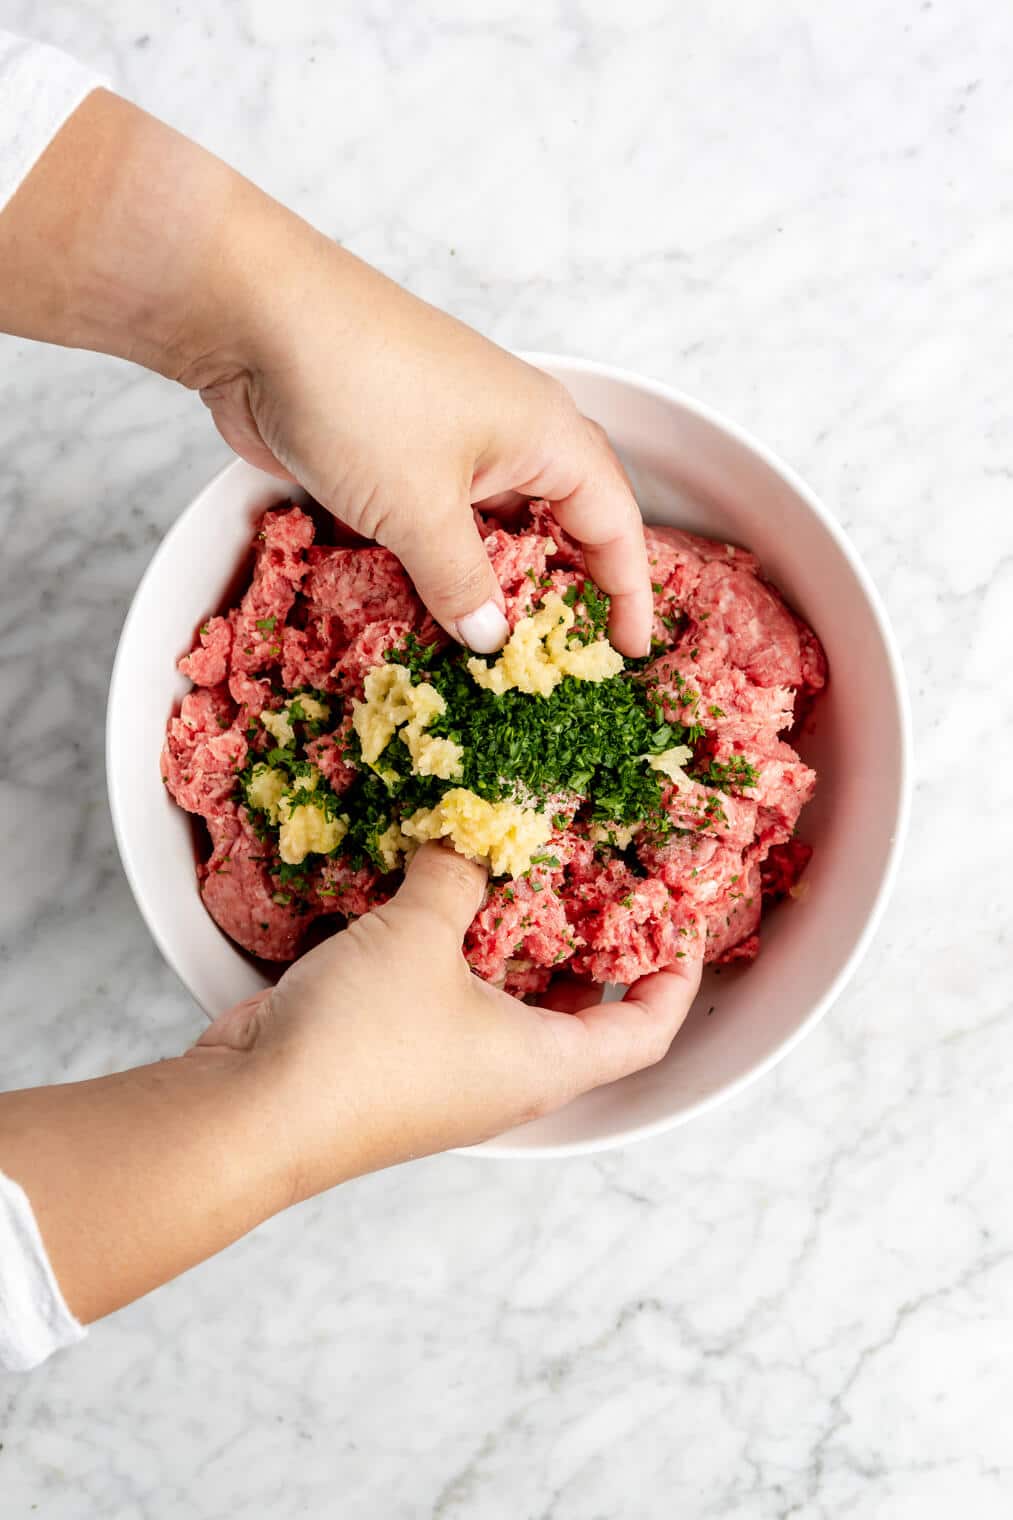 Hands mixing together ground beef with garlic and parsley in a white bowl.